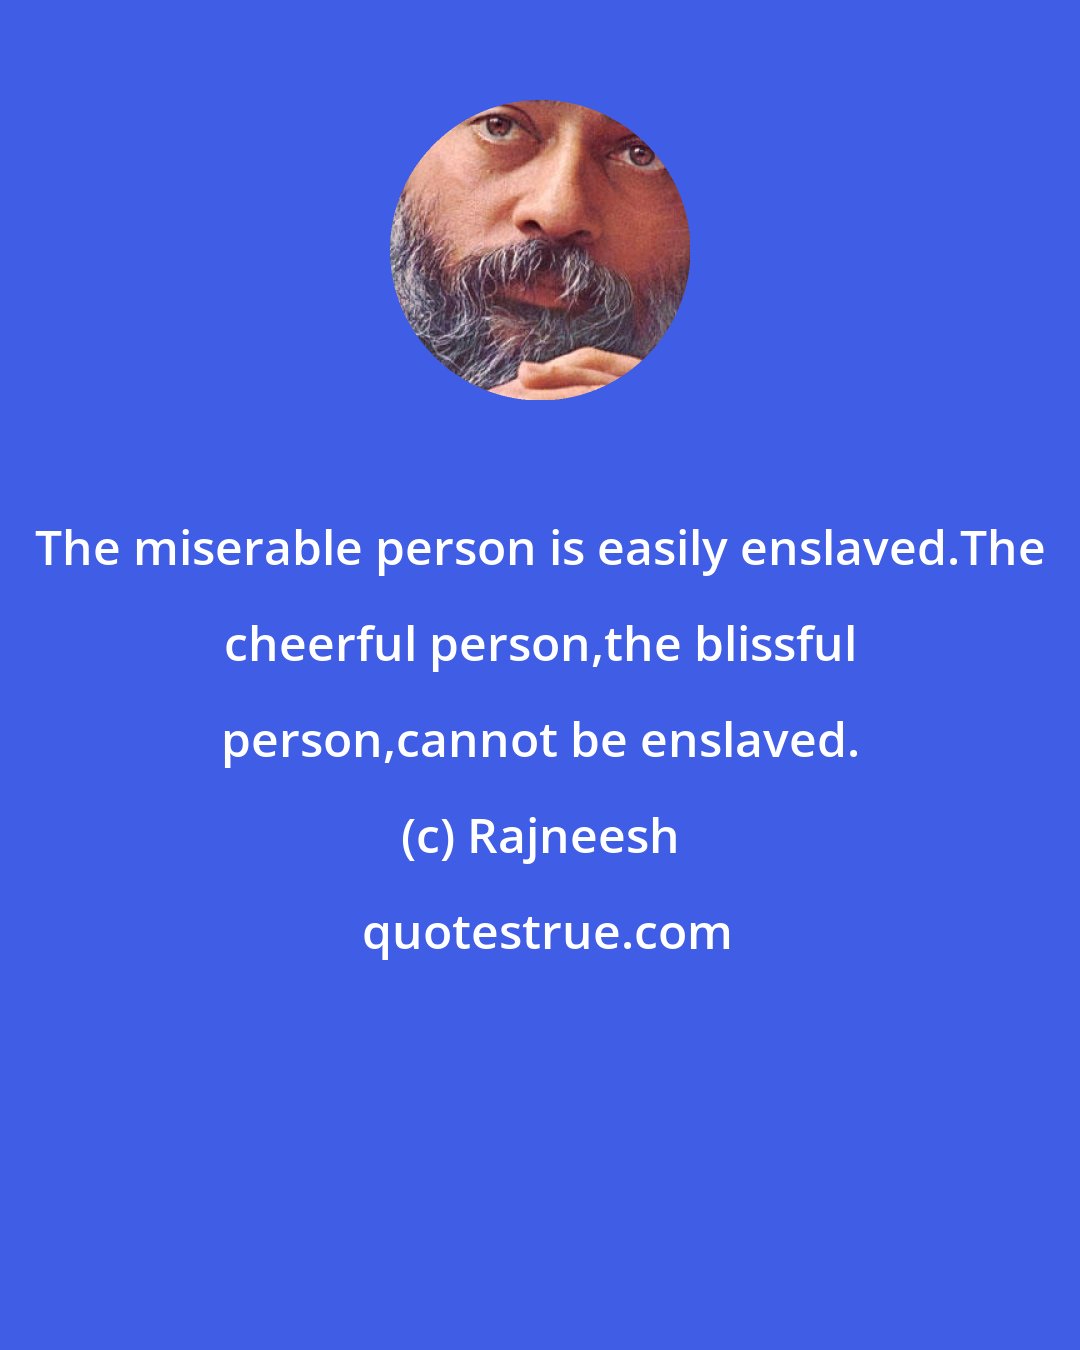 Rajneesh: The miserable person is easily enslaved.The cheerful person,the blissful person,cannot be enslaved.